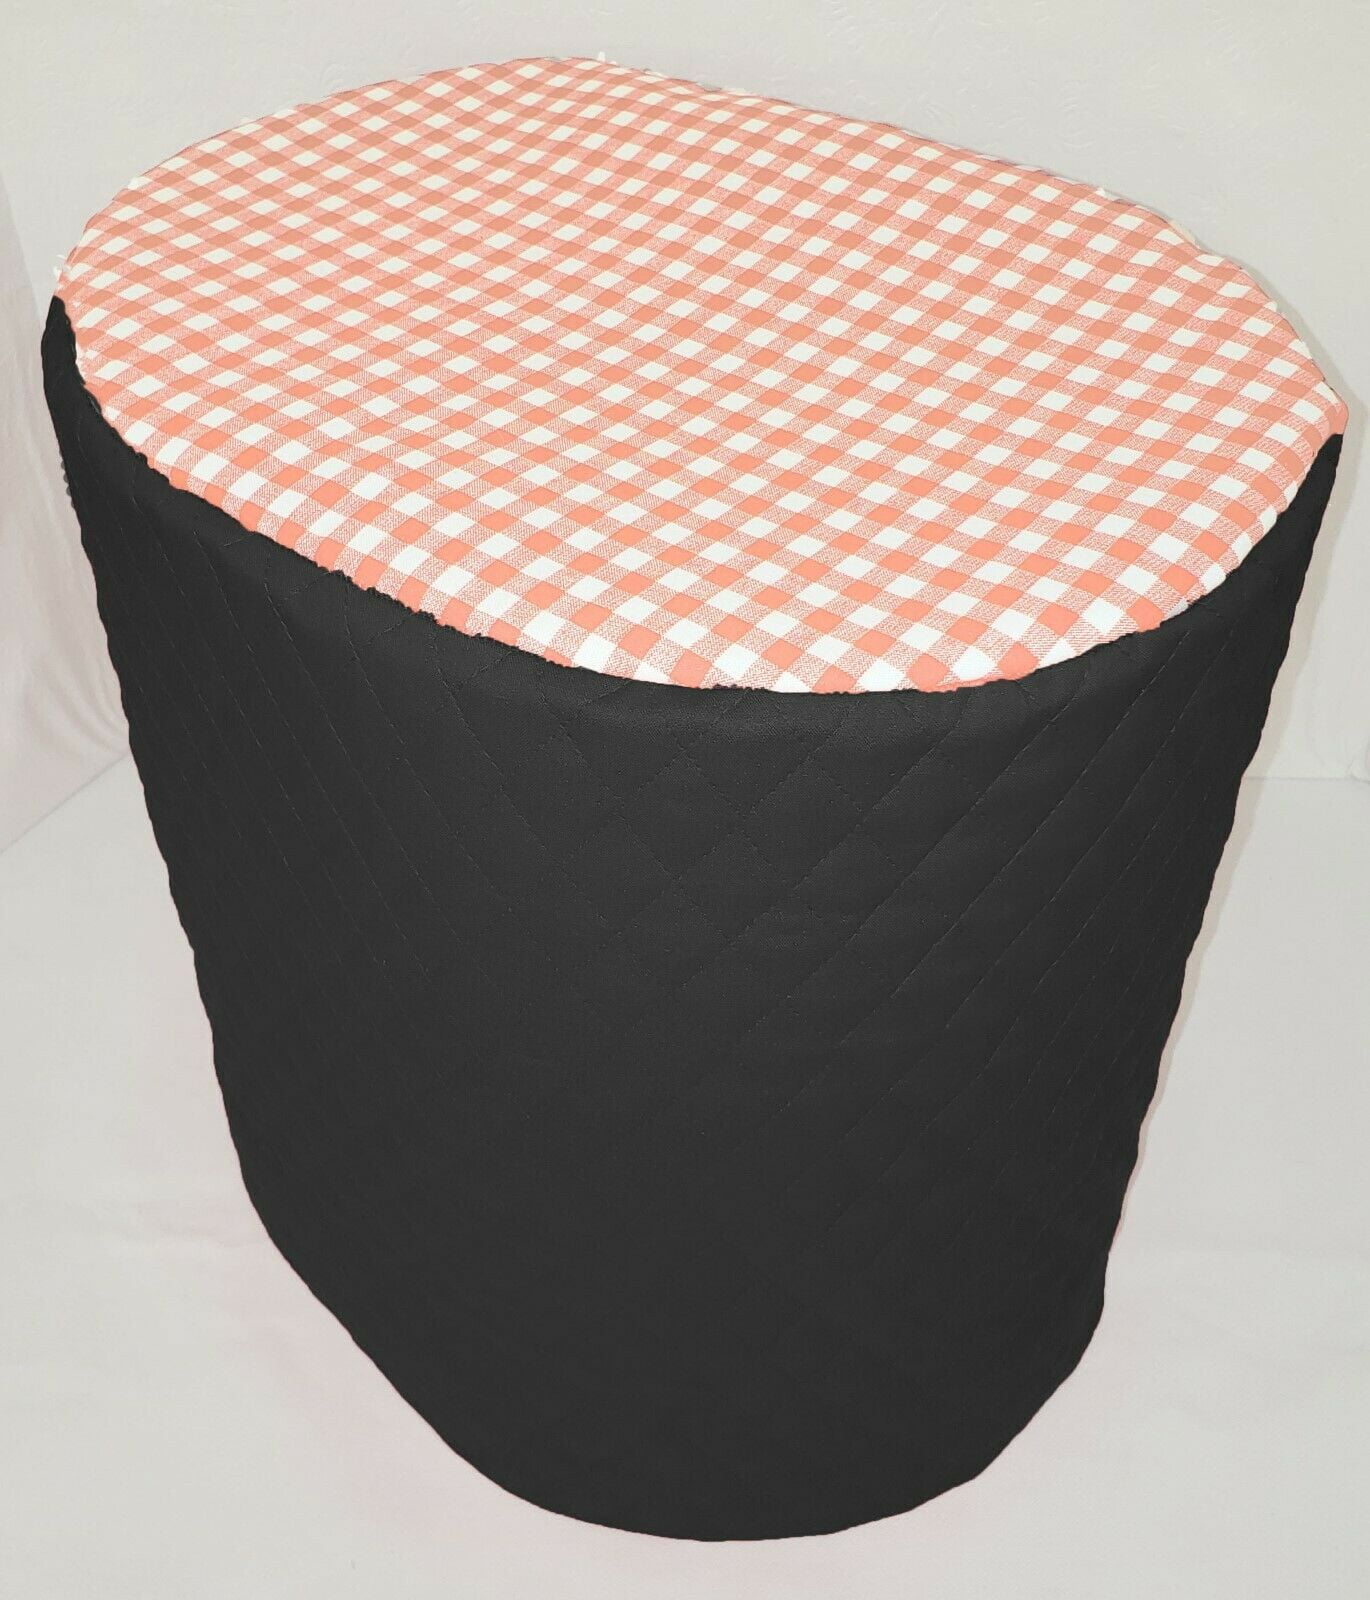 Quilted Fabric Keurig K45 Coffee Brewer Cover NEW or color choice Black 